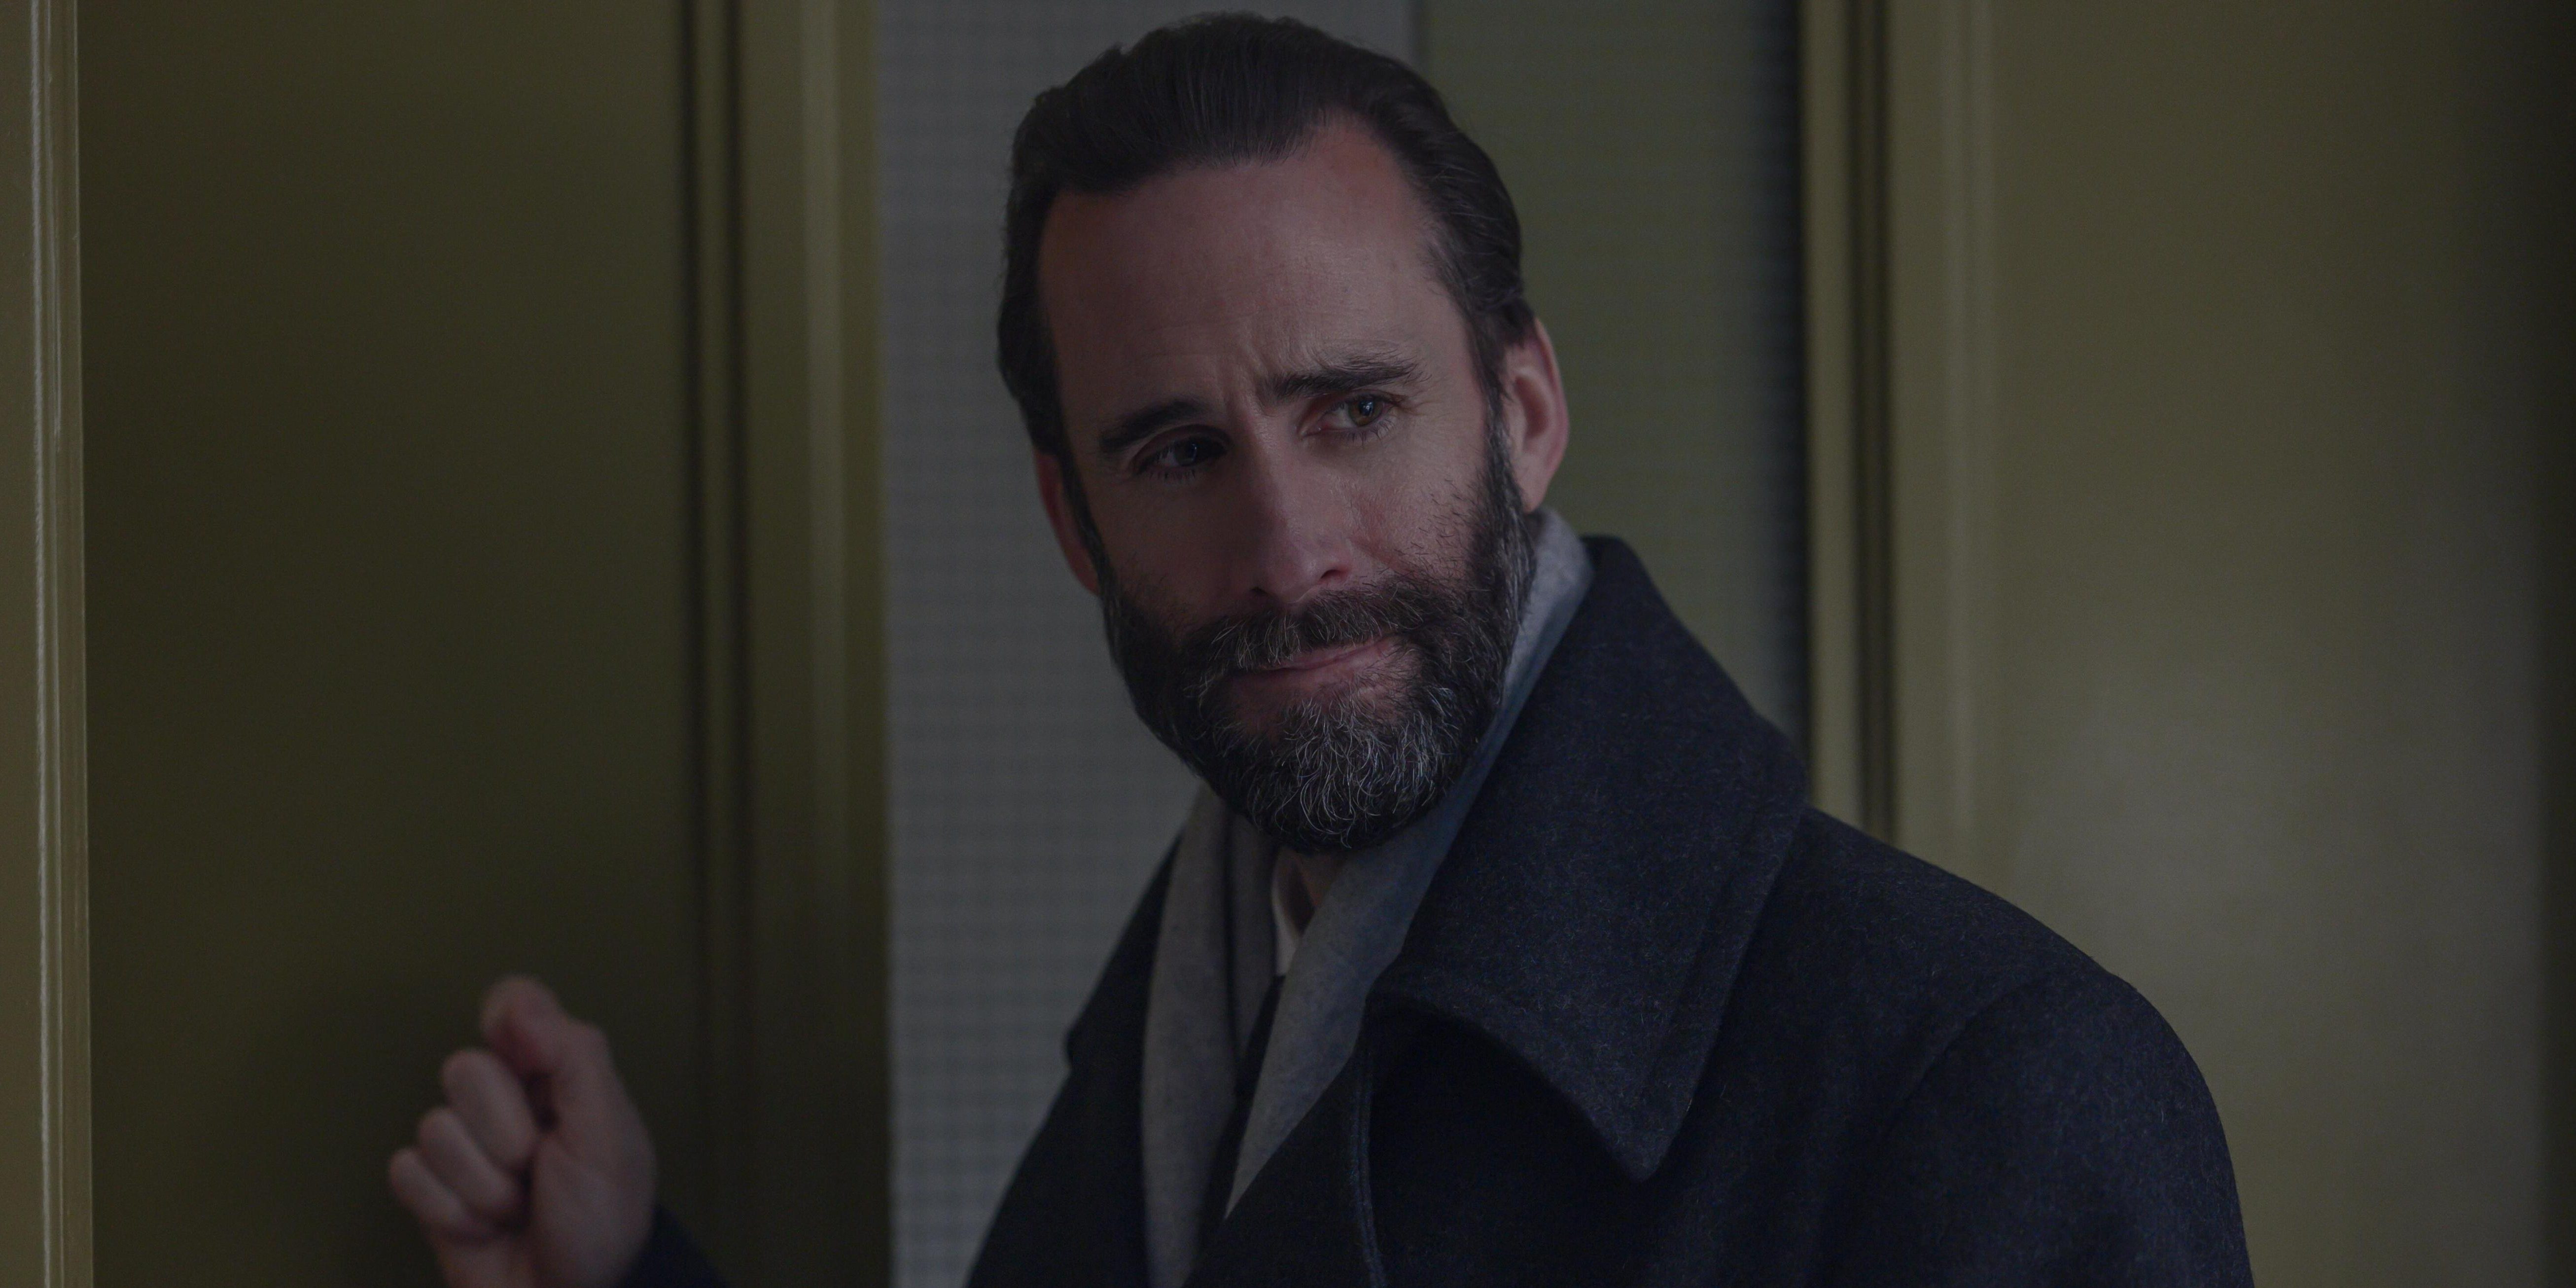 Did Joseph Fiennes’ Commander Fred Waterford Leave The Handmaid’s Tale?